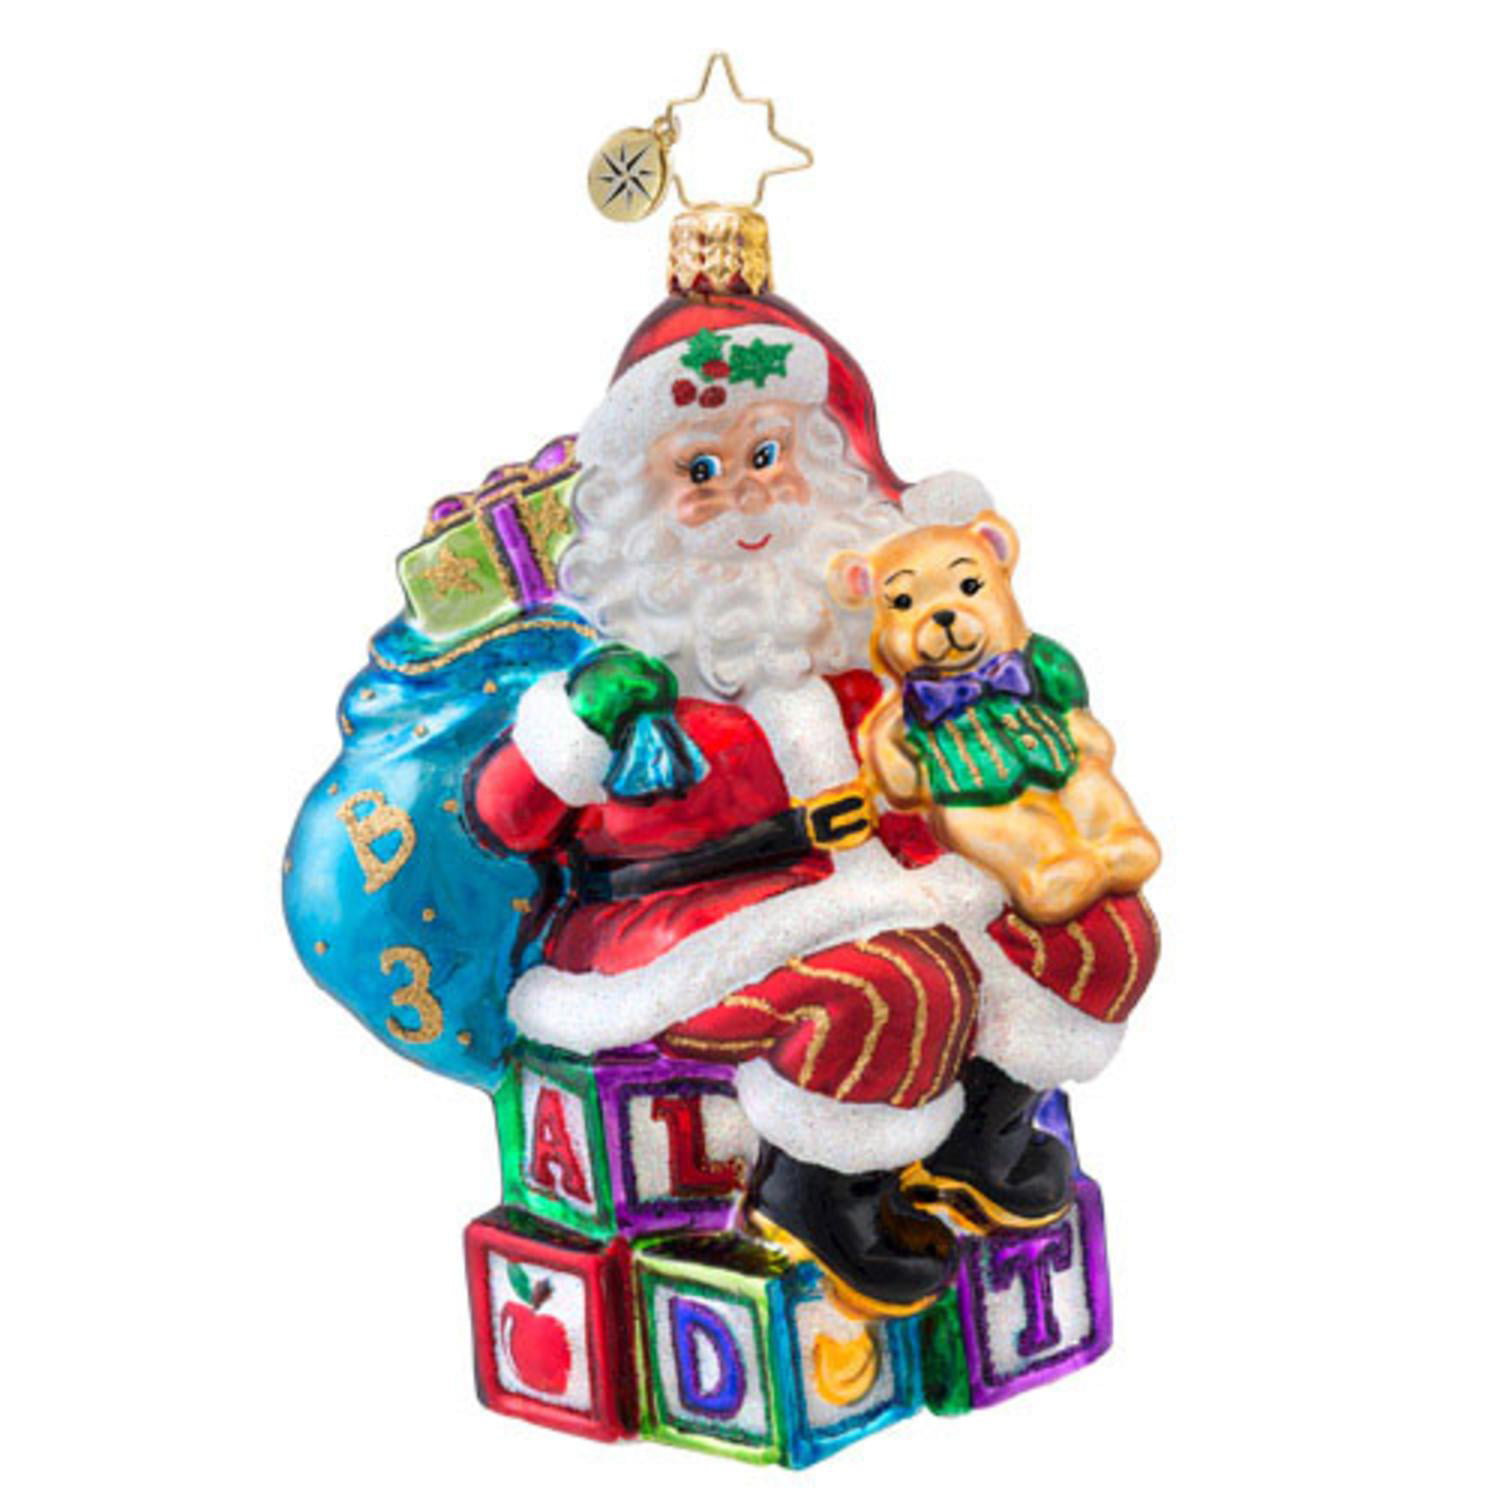 Christopher Radko Hand-Crafted European Glass Christmas Ornament The Building Blocks of Learning